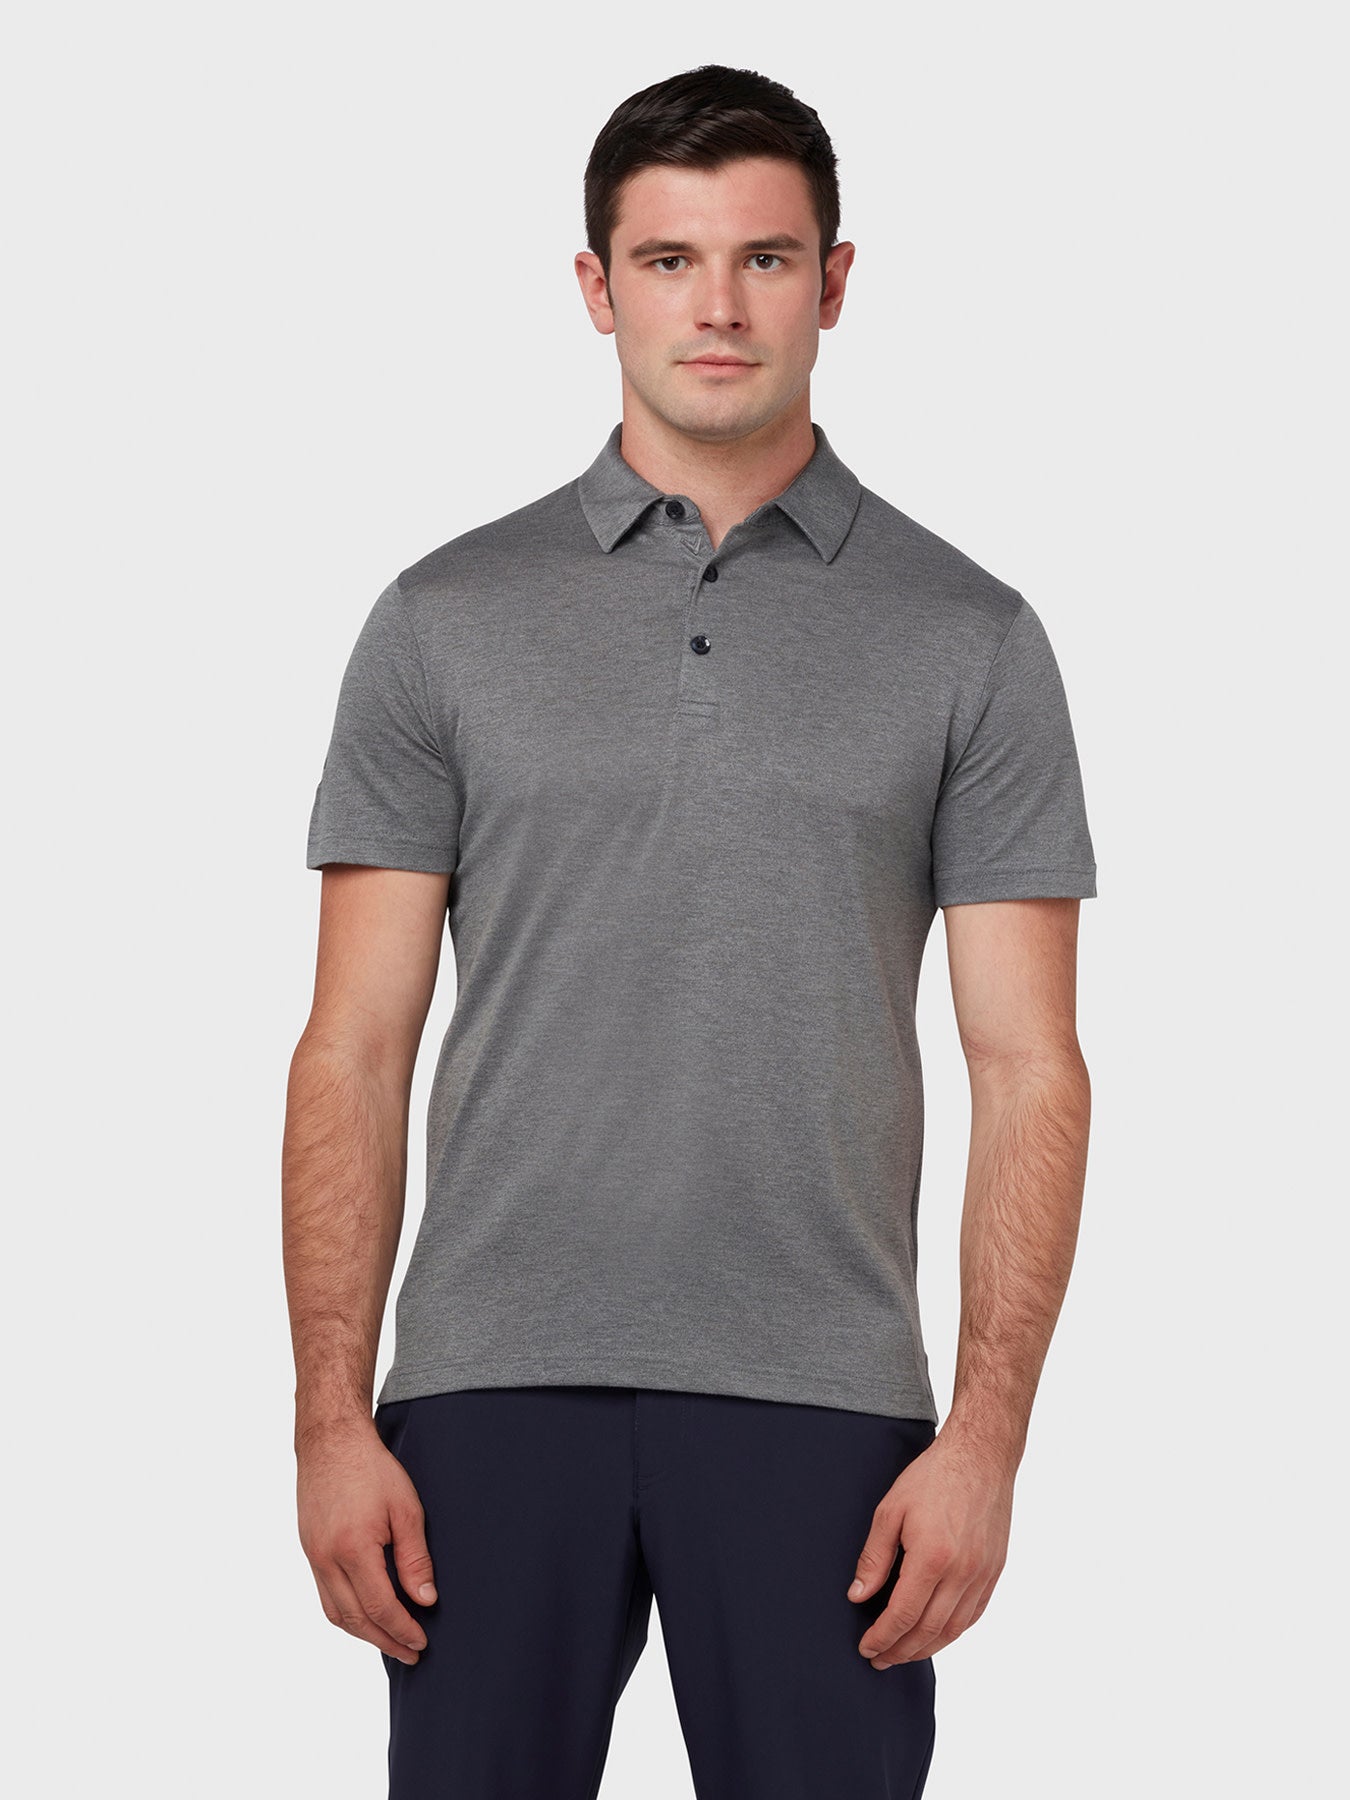 View Soft Touch Solid Polo In Black Heather Black Heather S information